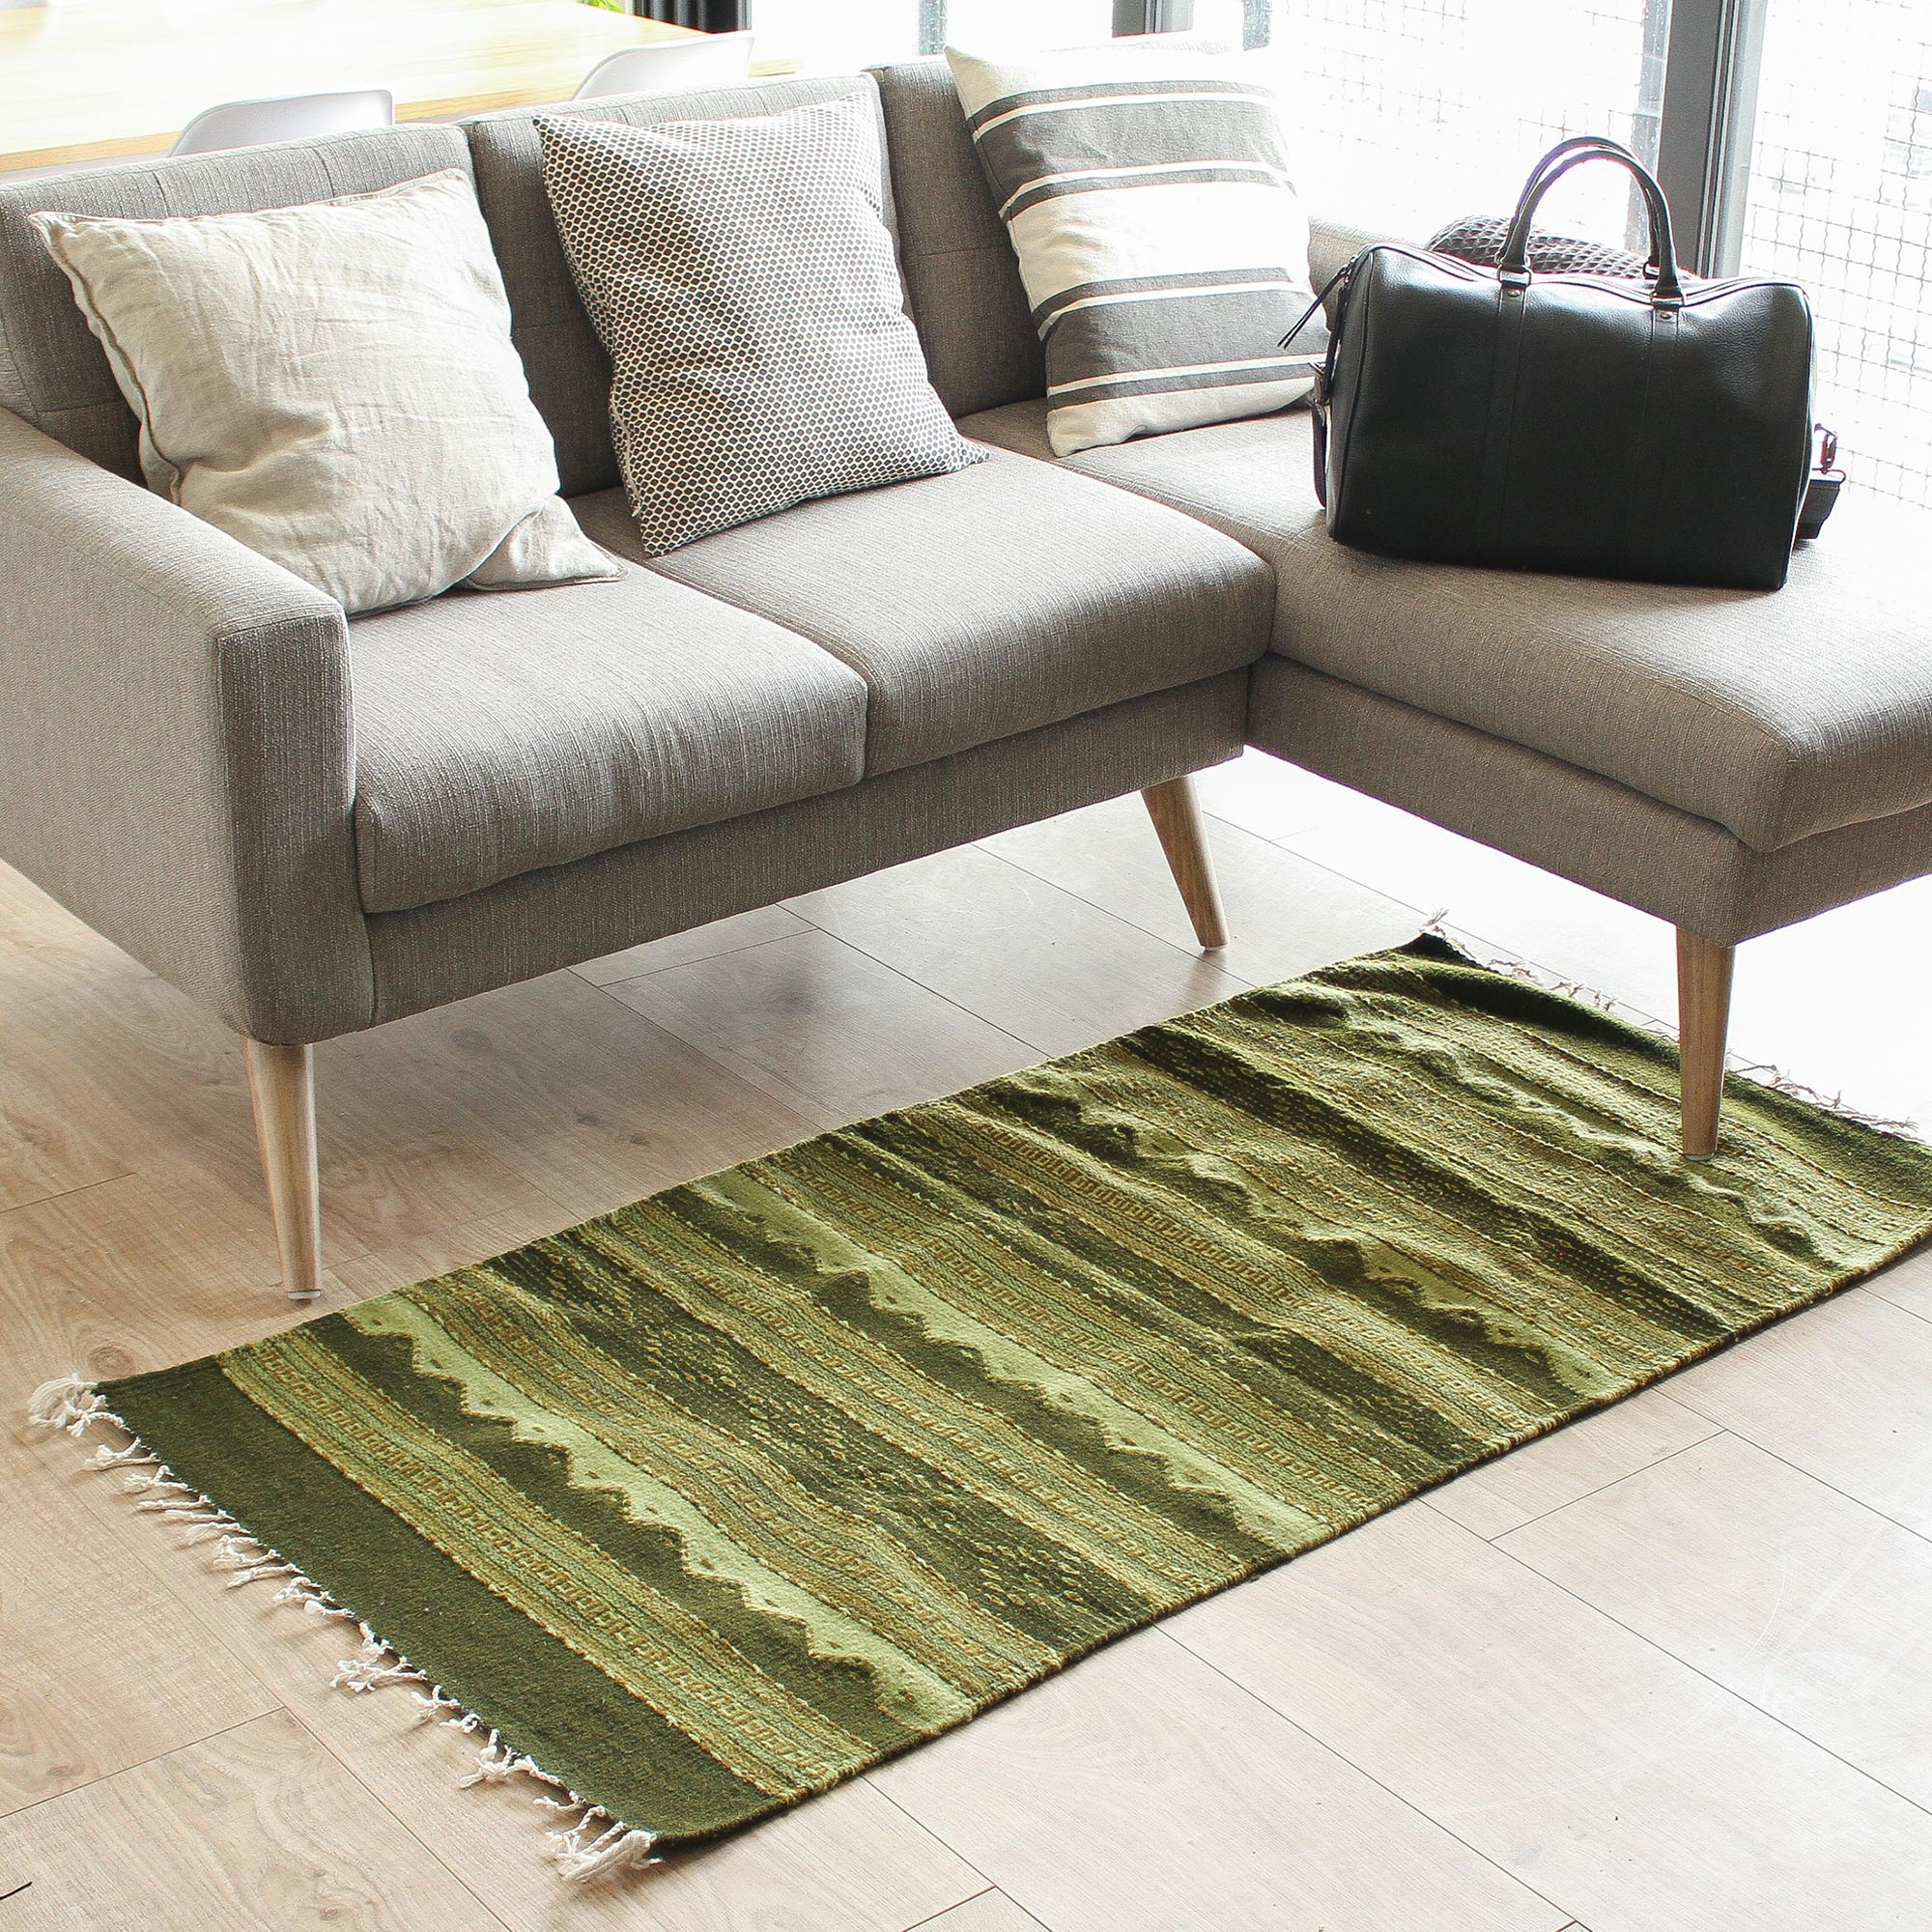 Geometric Pattern Handwoven Wool Area Rug (2.5x4.5), 'Between the Mountains